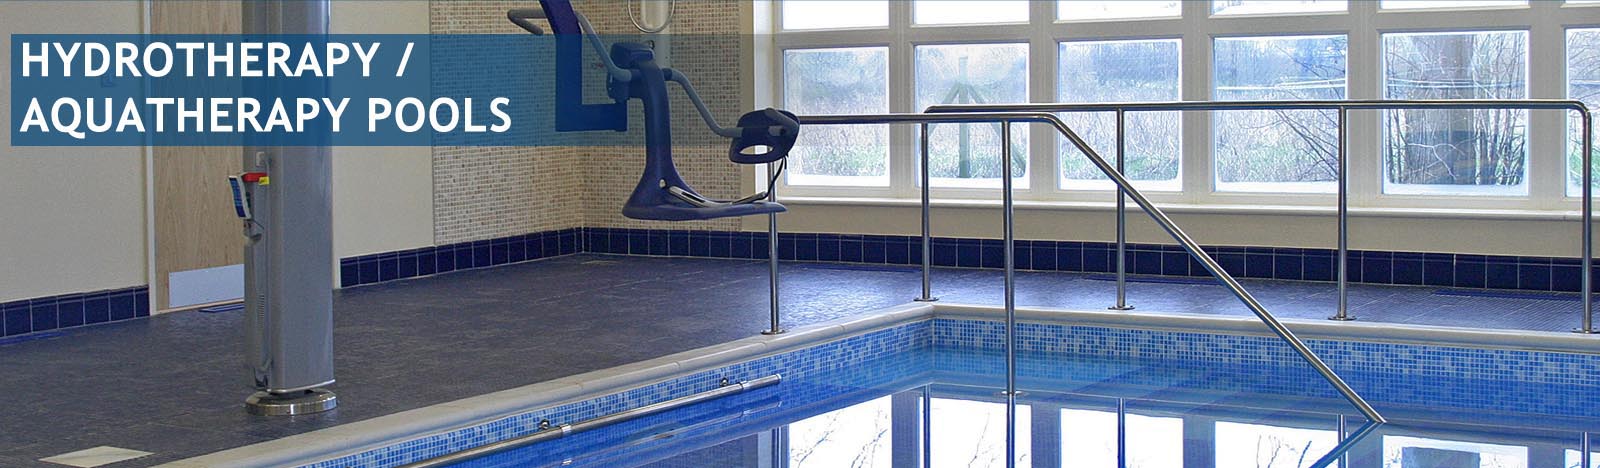 hydrotherapy pools installers cardiff